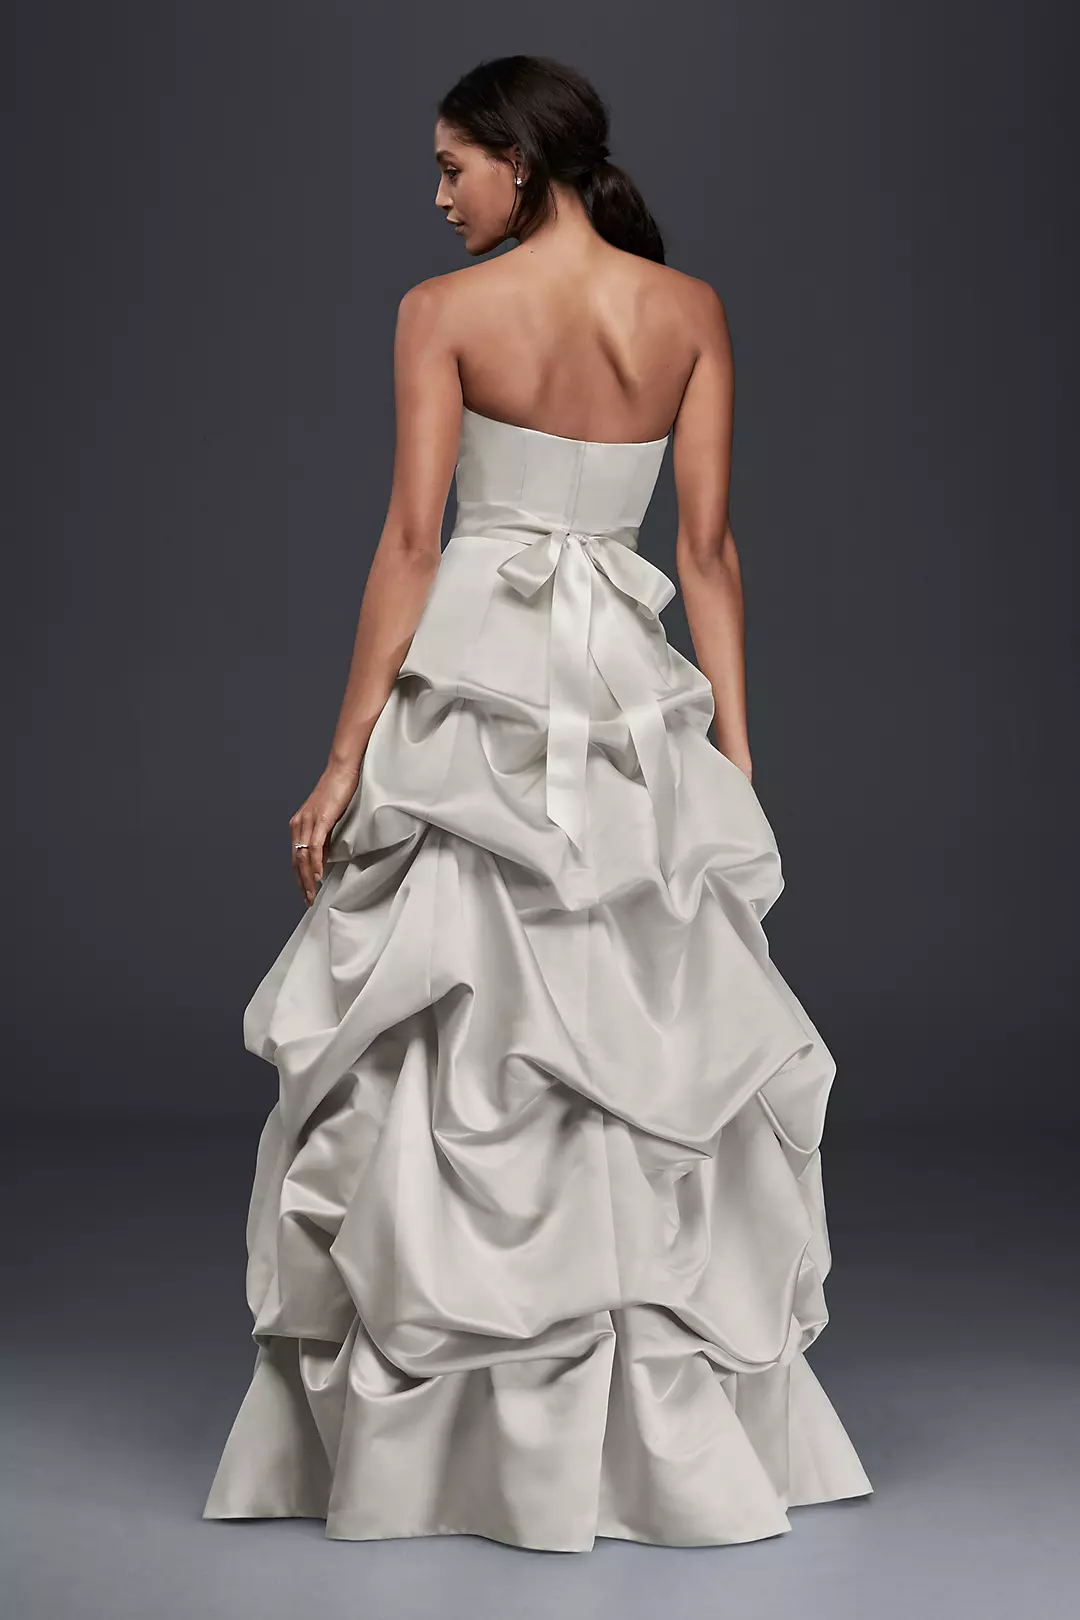 Strapless Drop-Waist Ball Gown with Skirt Pickups Image 2